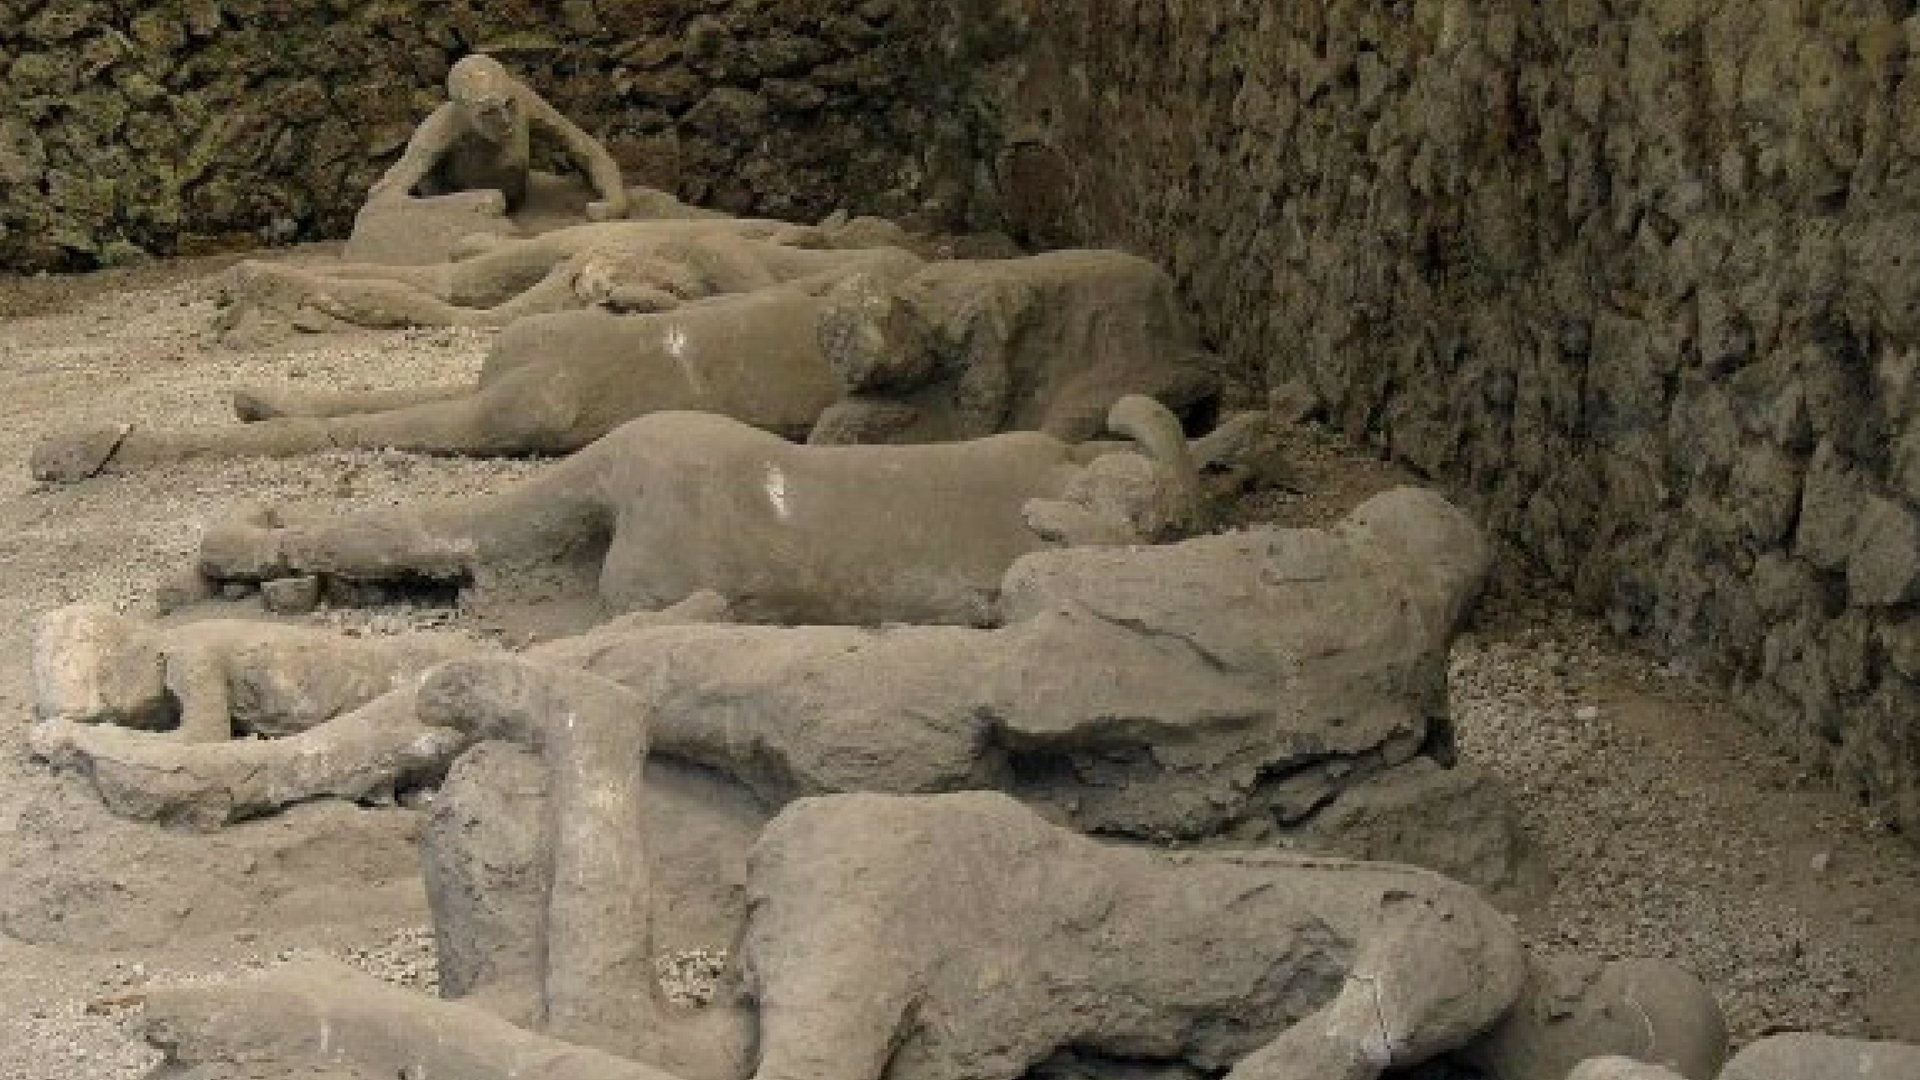 The Casts of Pompeii. How are they made?